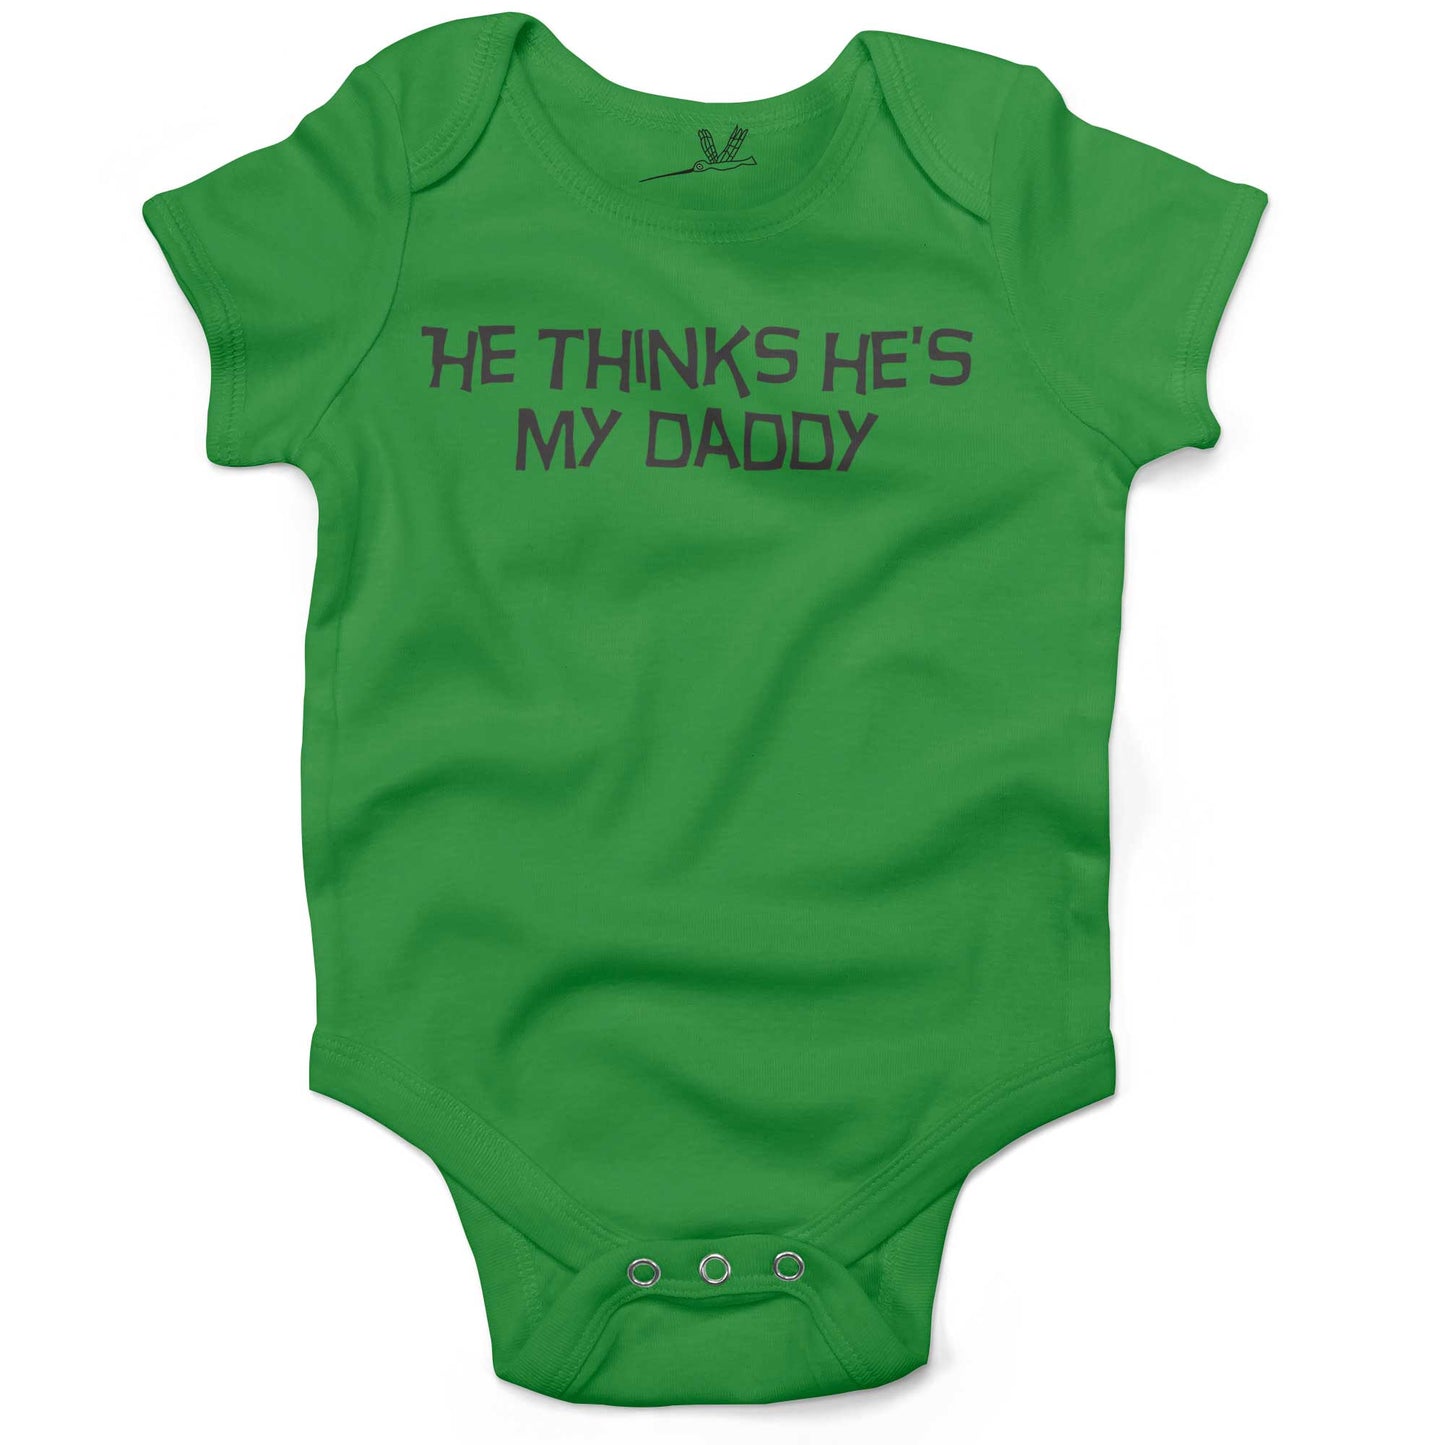 He Thinks He's My Daddy Infant Bodysuit or Raglan Tee-Grass Green-3-6 months